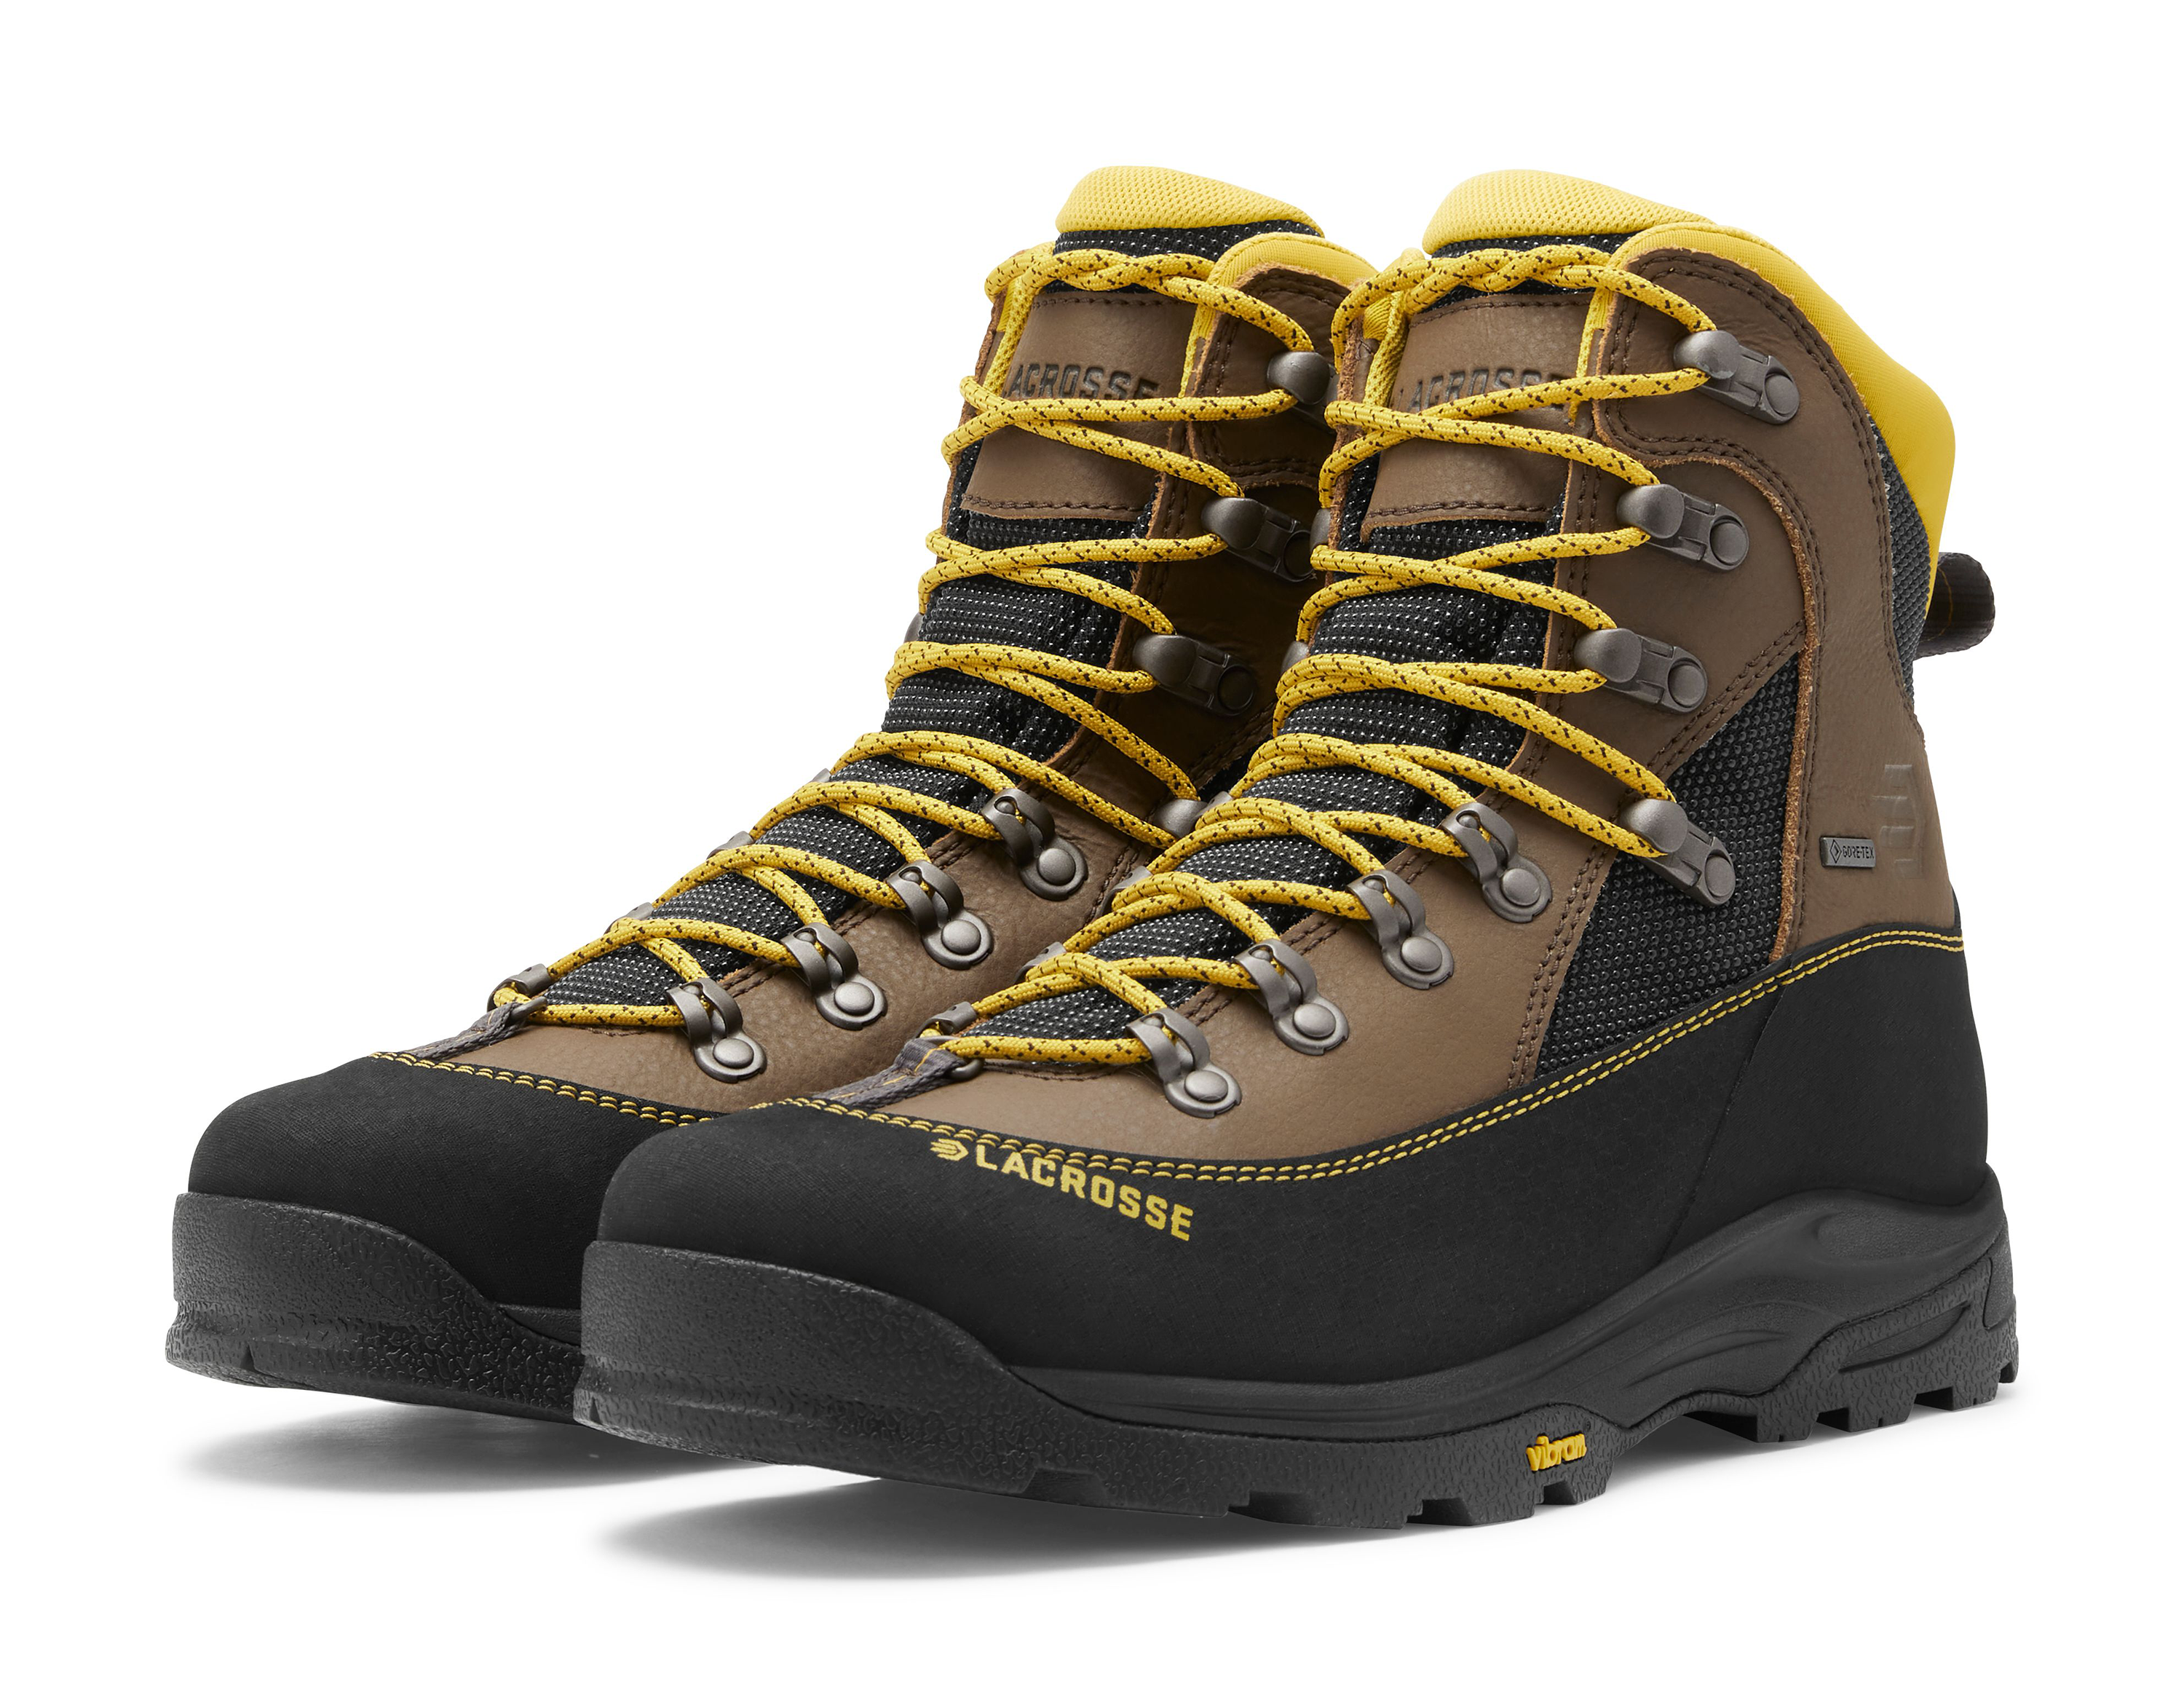 LaCrosse Ursa MS GORE-TEX Hunting Boots for Men - Brown/Gold - 8.5W